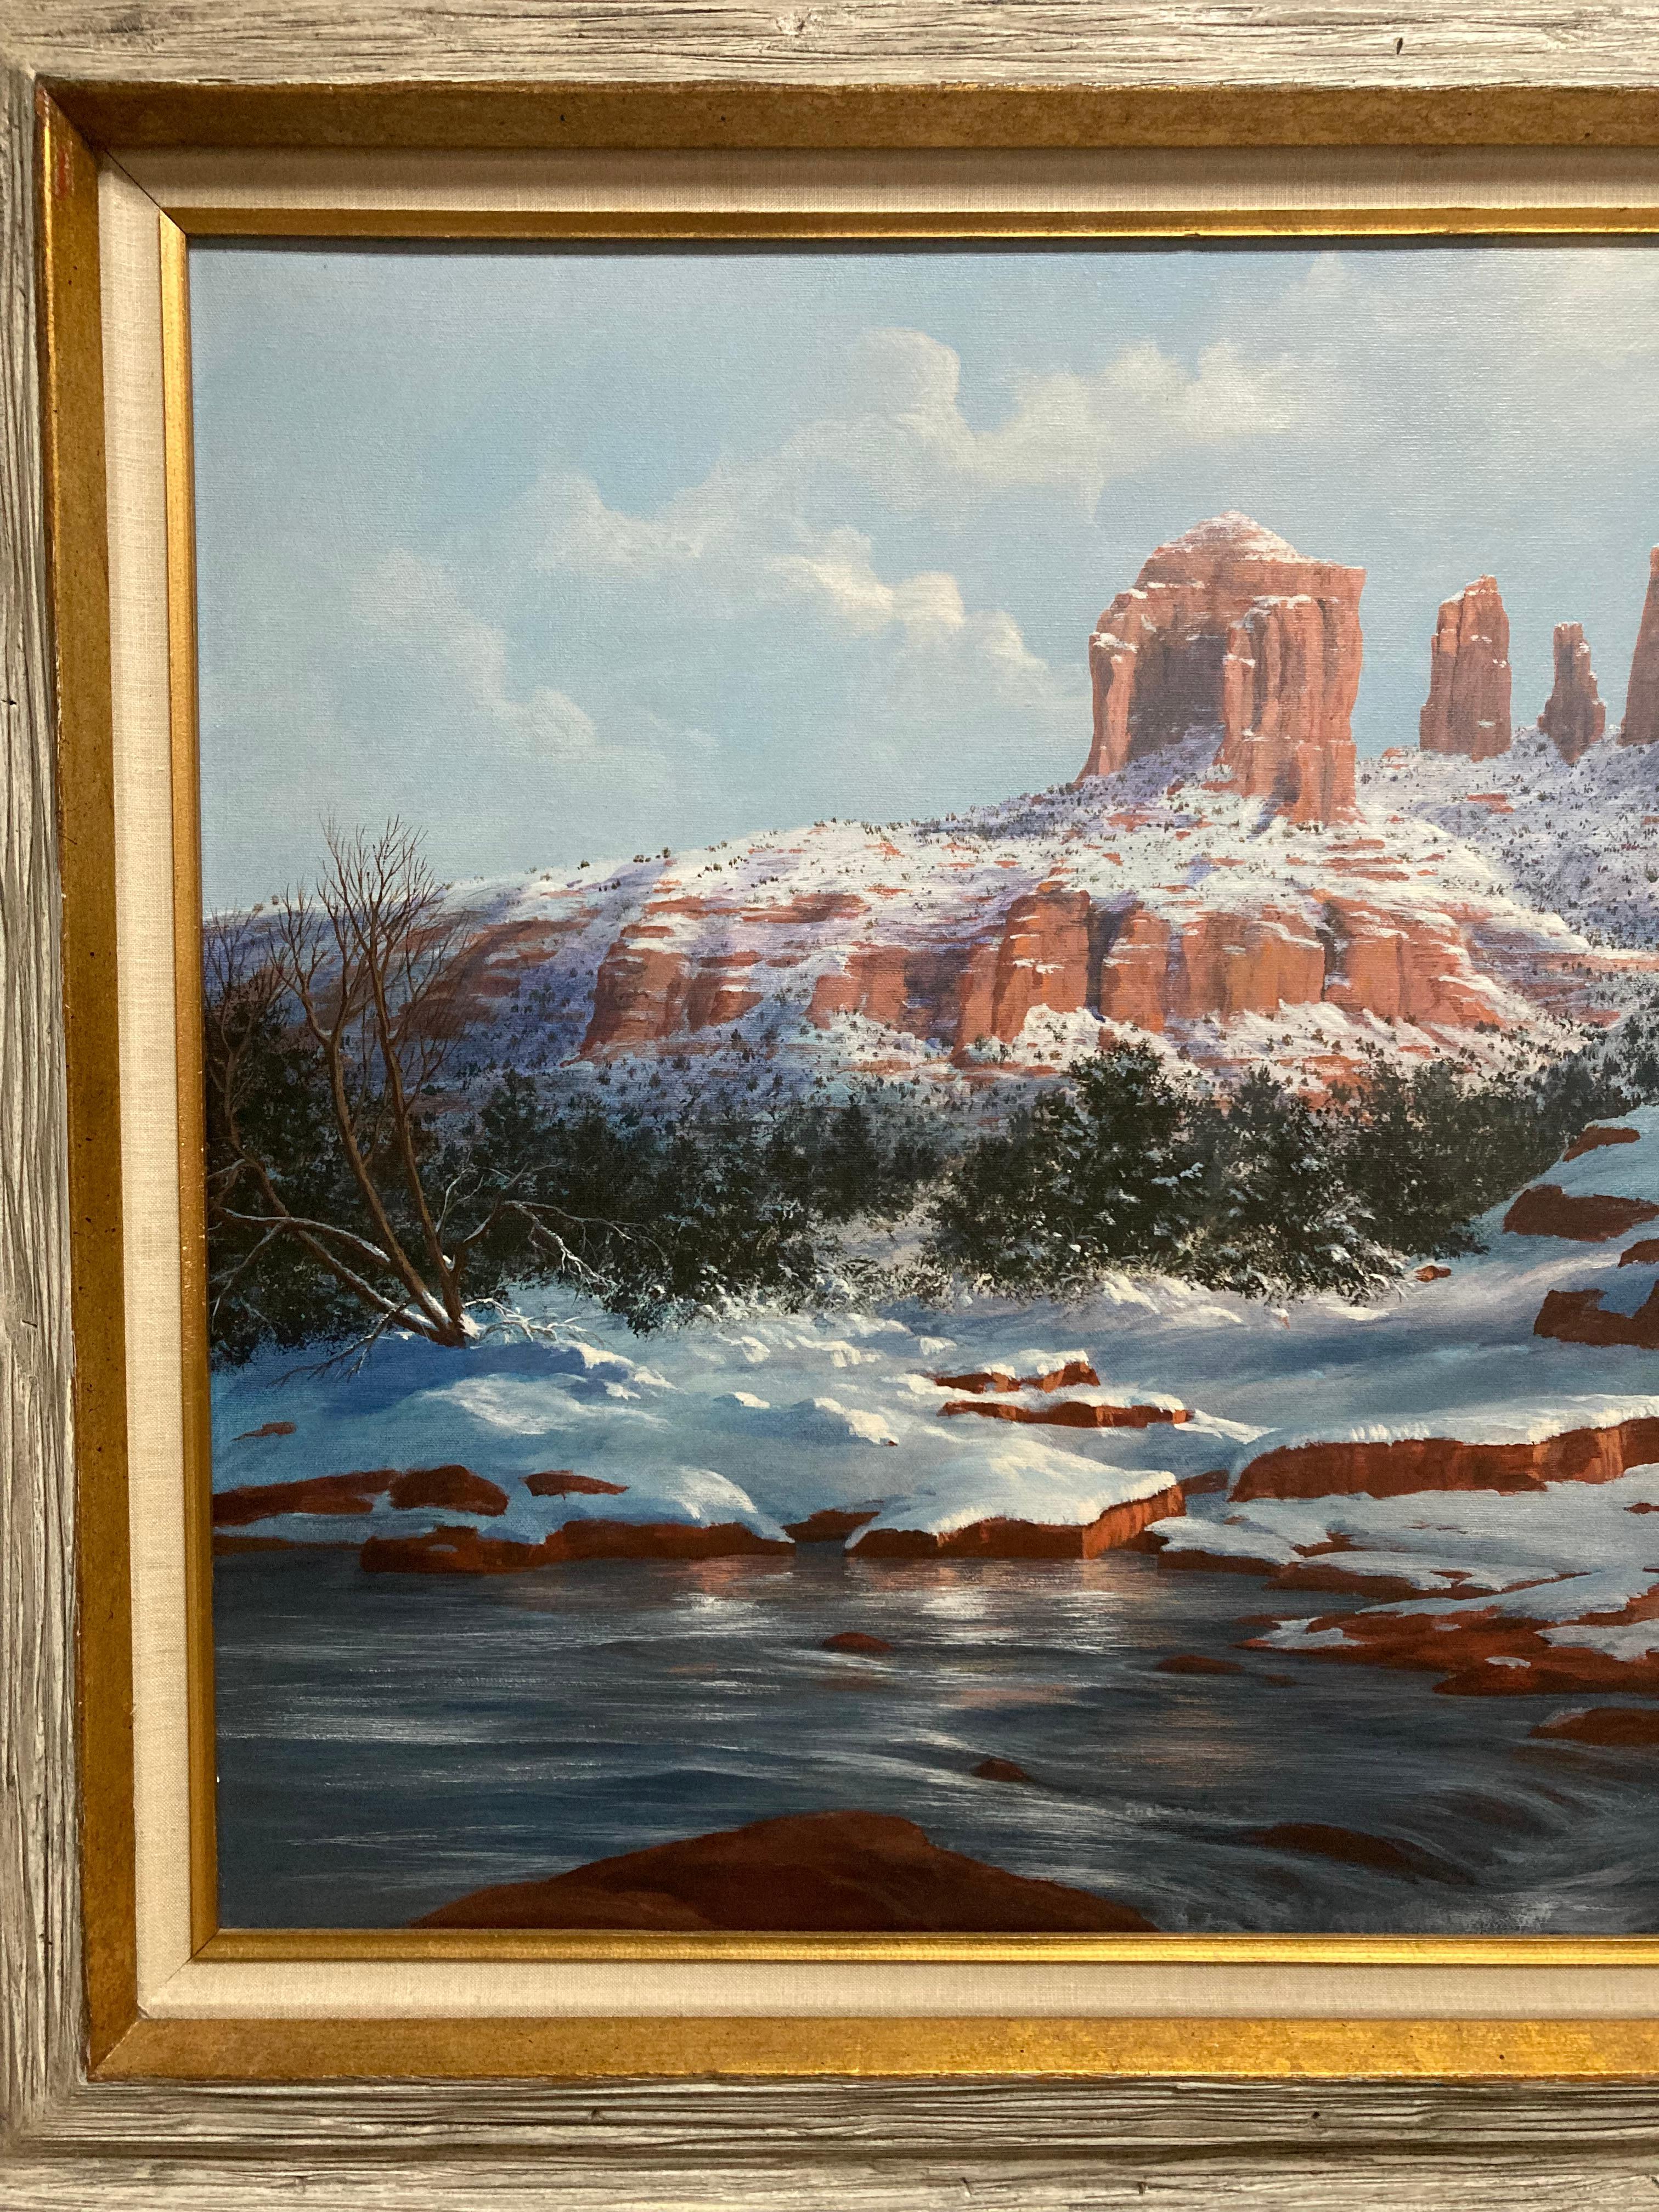 Original Oil on canvas
In excellent condition
Frame measures 44x33x1
Painting itself 36x24